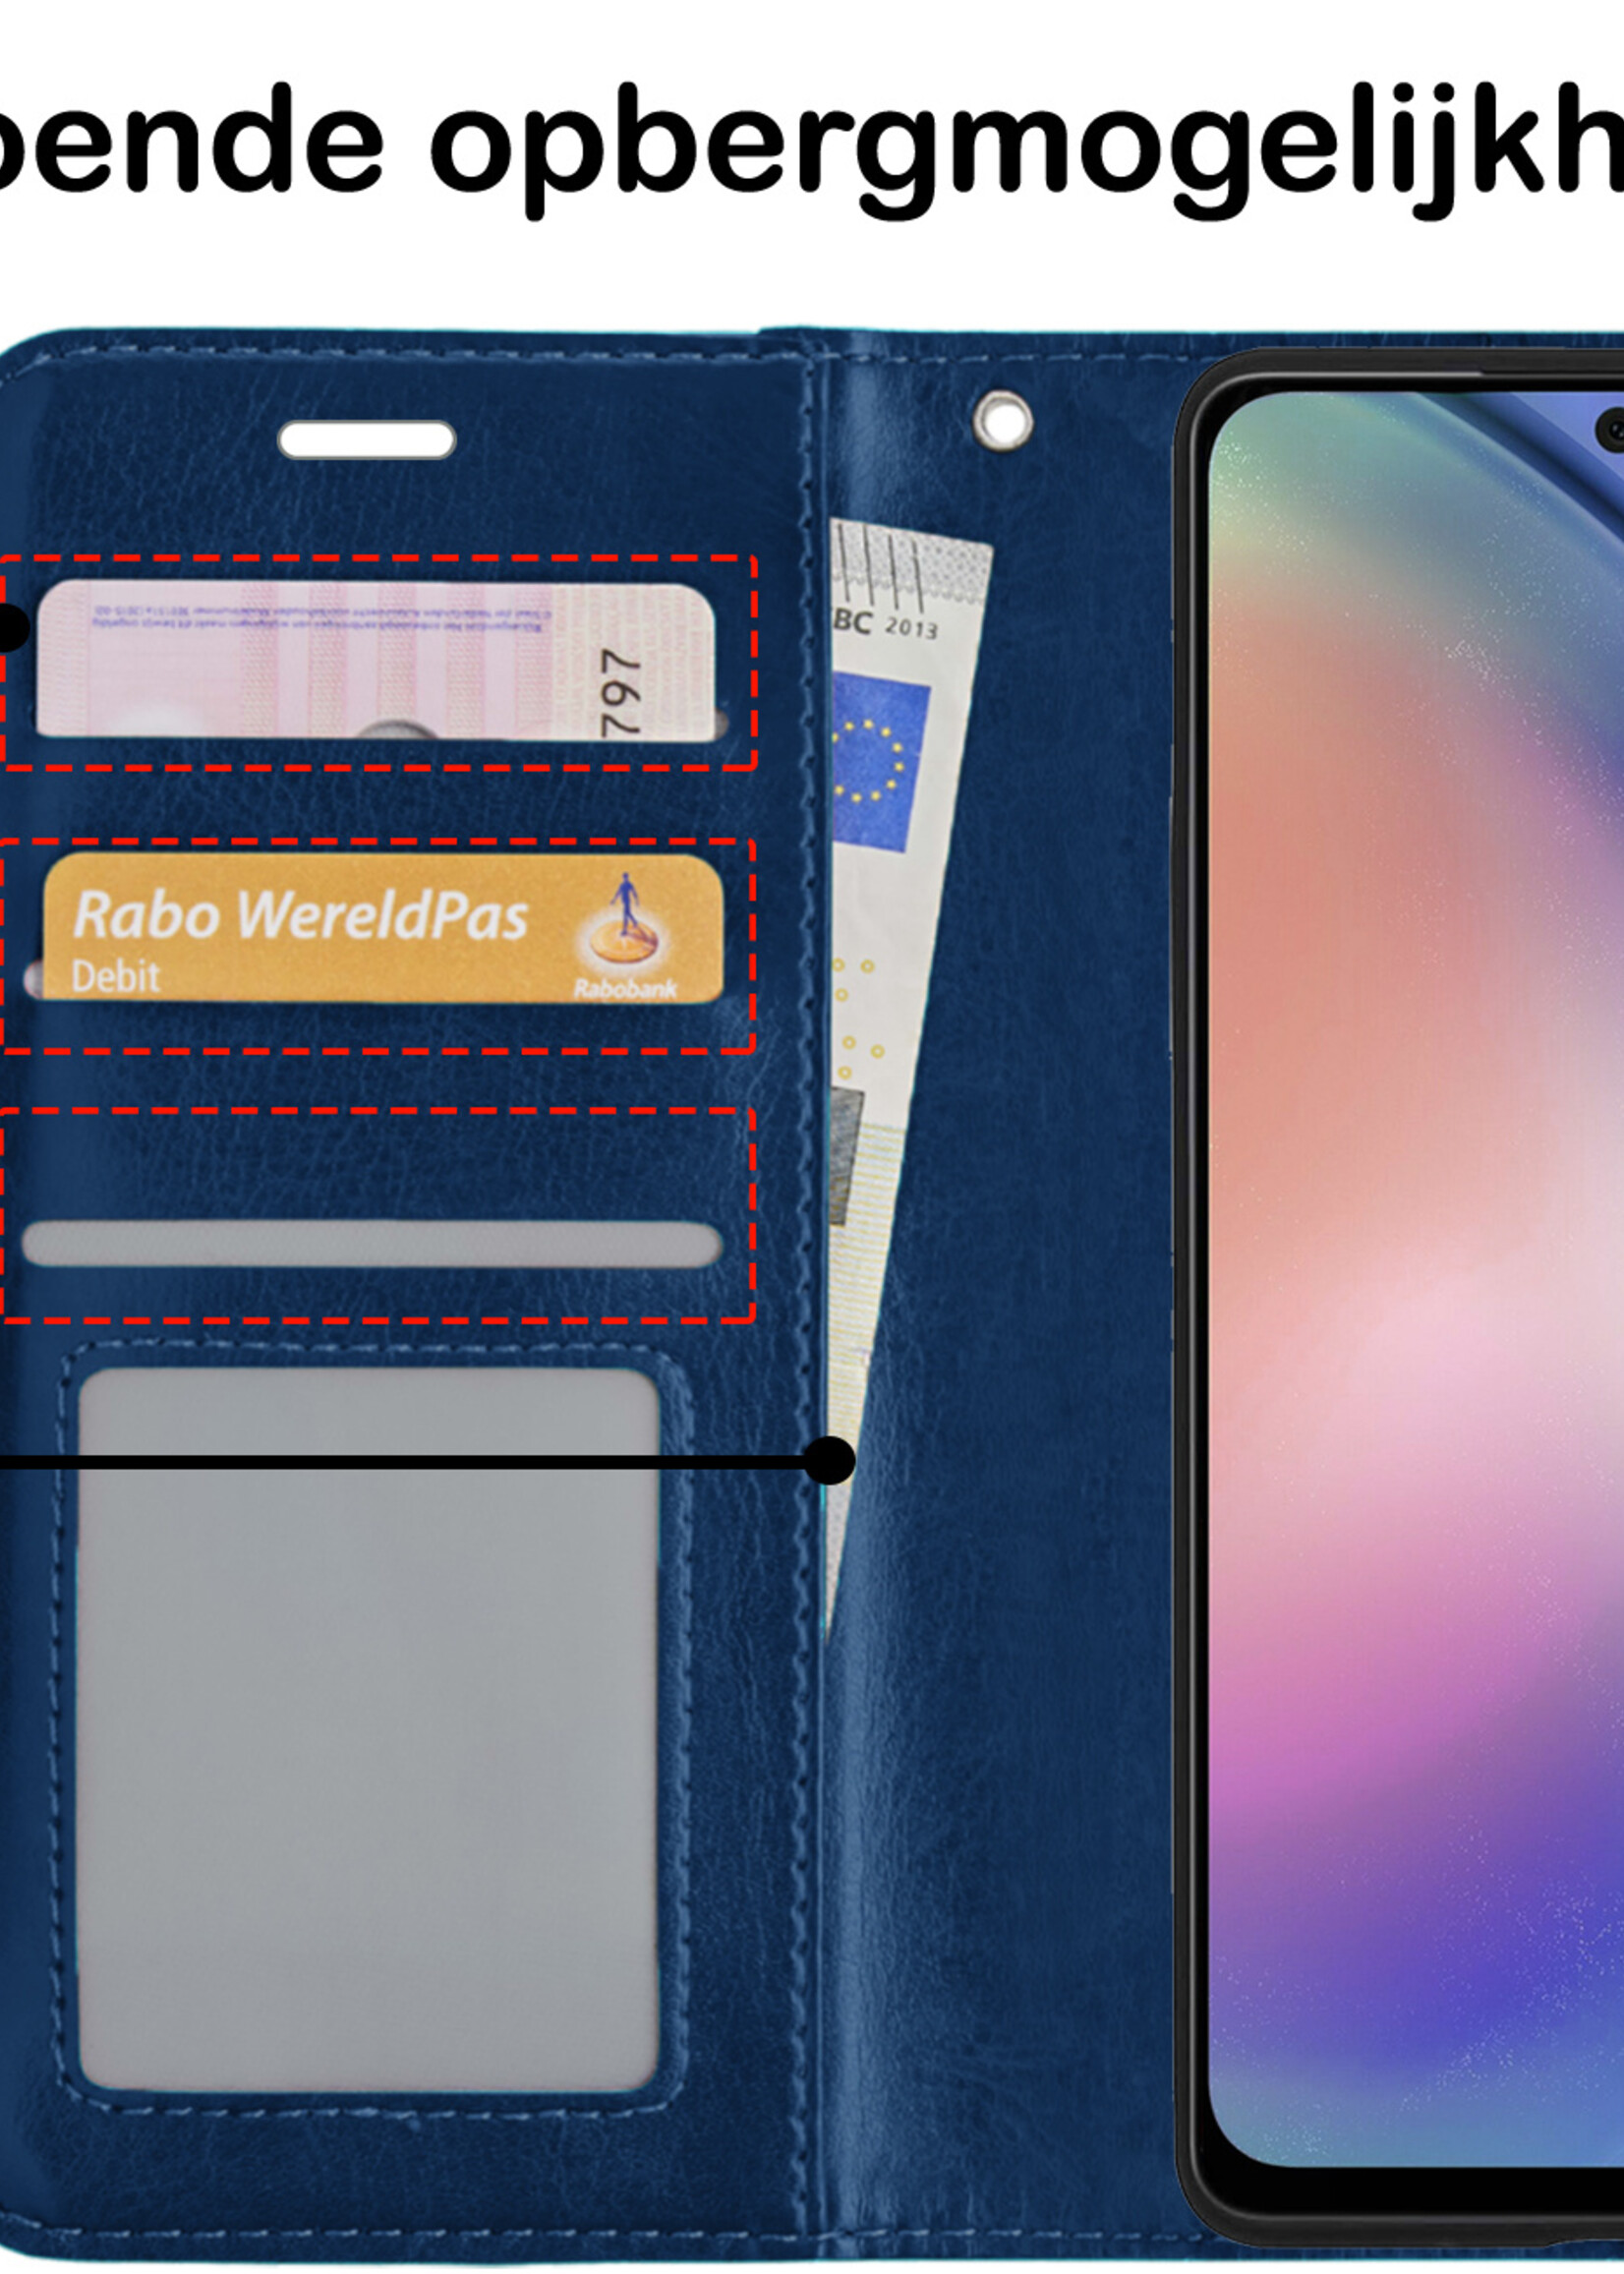 BTH Samsung A54 Hoesje Book Case Hoes Portemonnee Cover Walletcase - Samsung Galaxy A54 Hoes Bookcase Hoesje - Donkerblauw